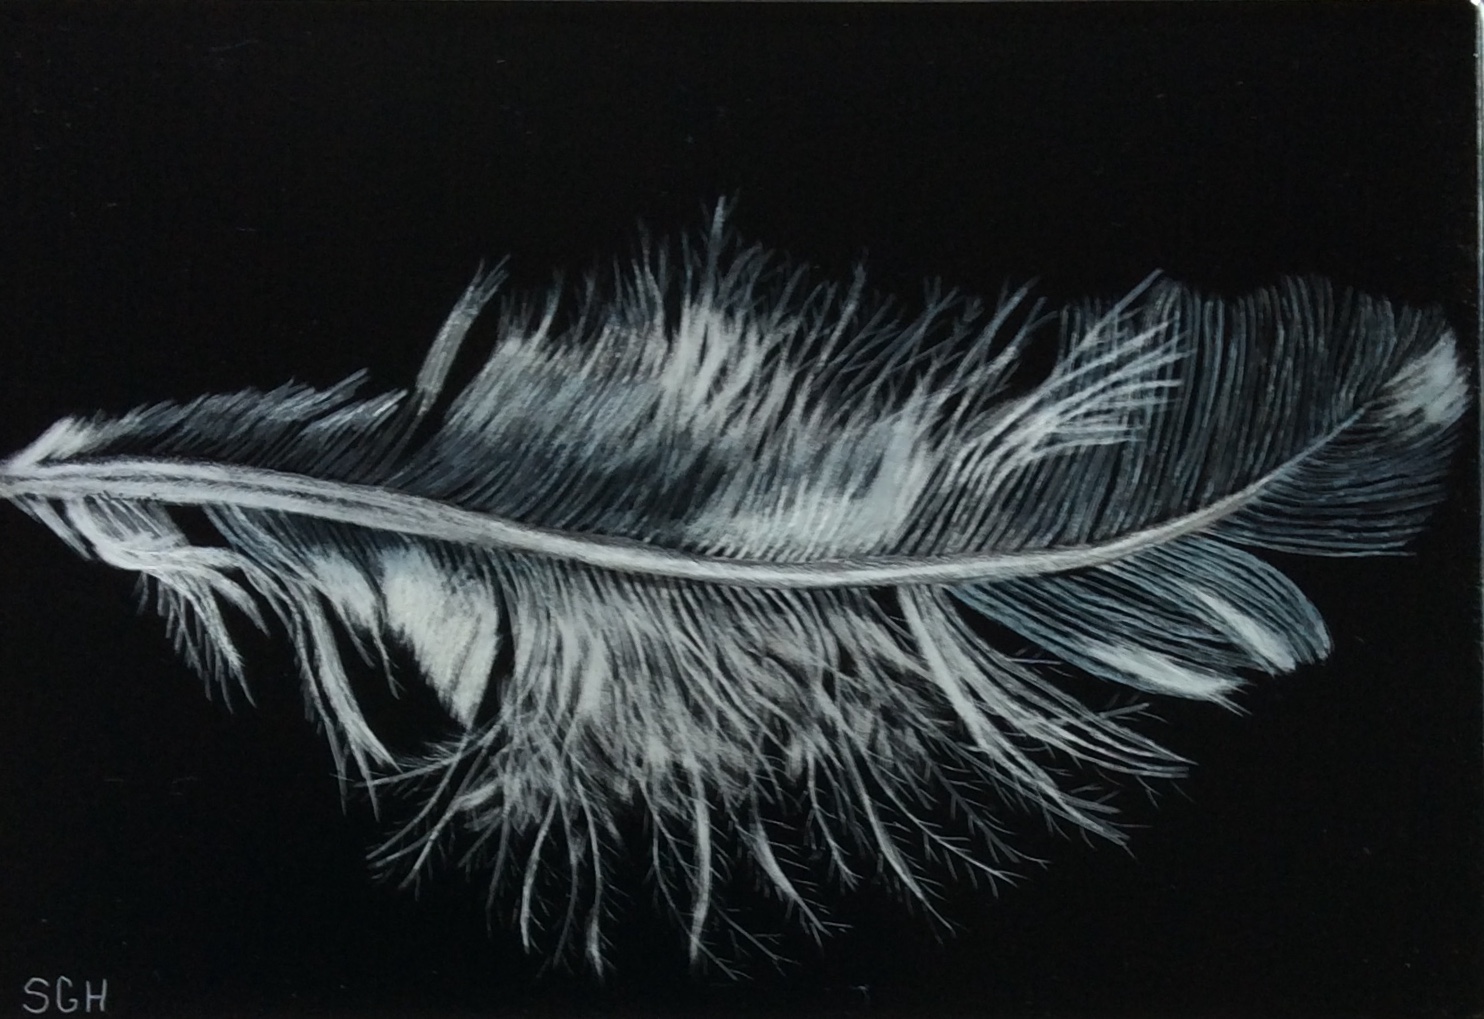 Feature Art No. 4, 2020-21: Scratchboard – The Feather